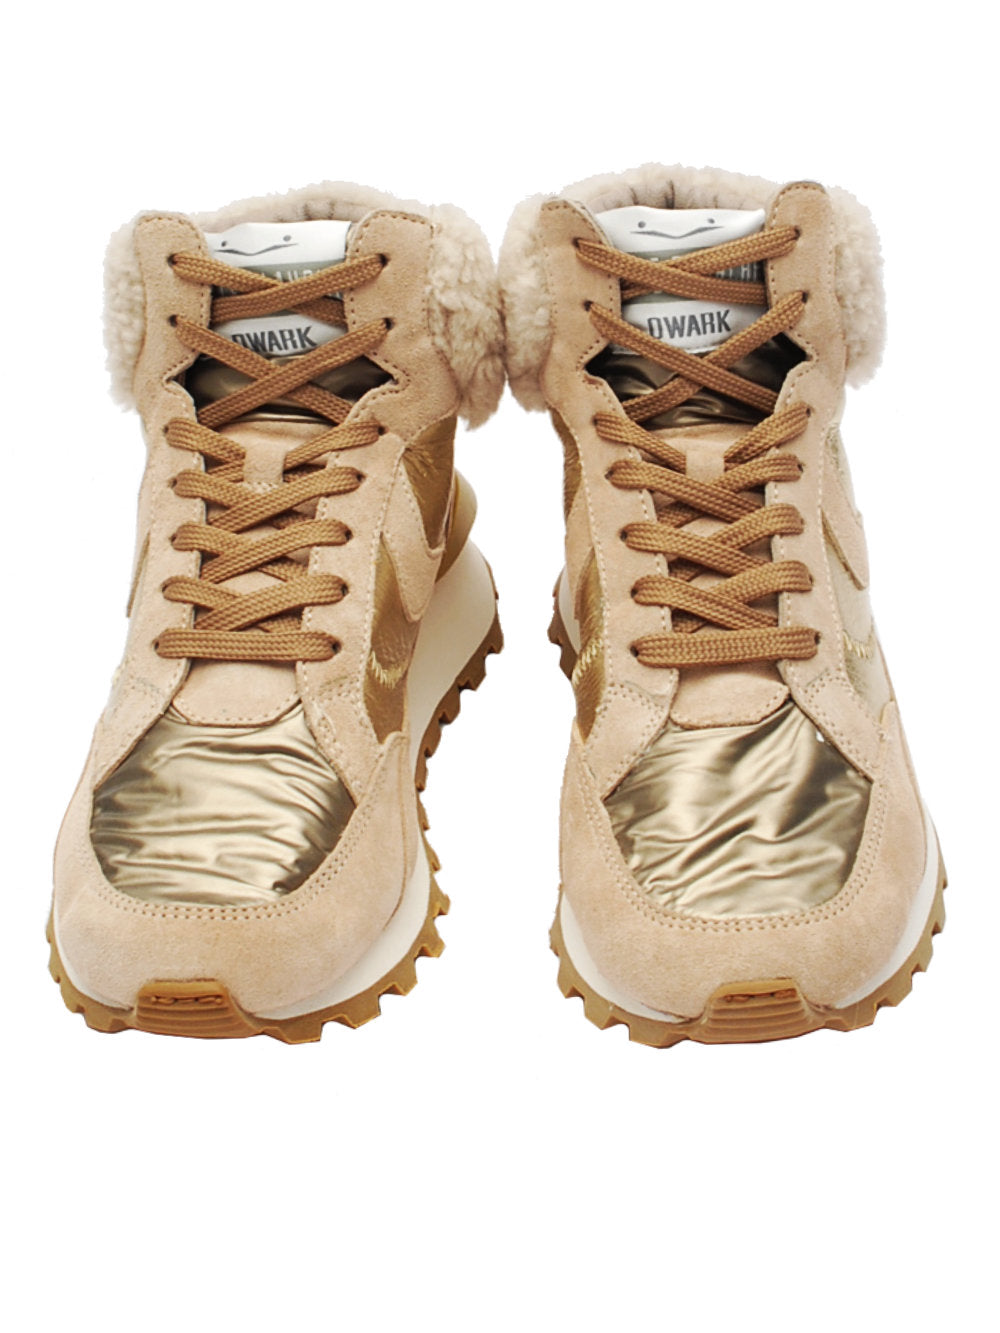 Voile blanche sneakers qwark high 2275 beige oro ai23